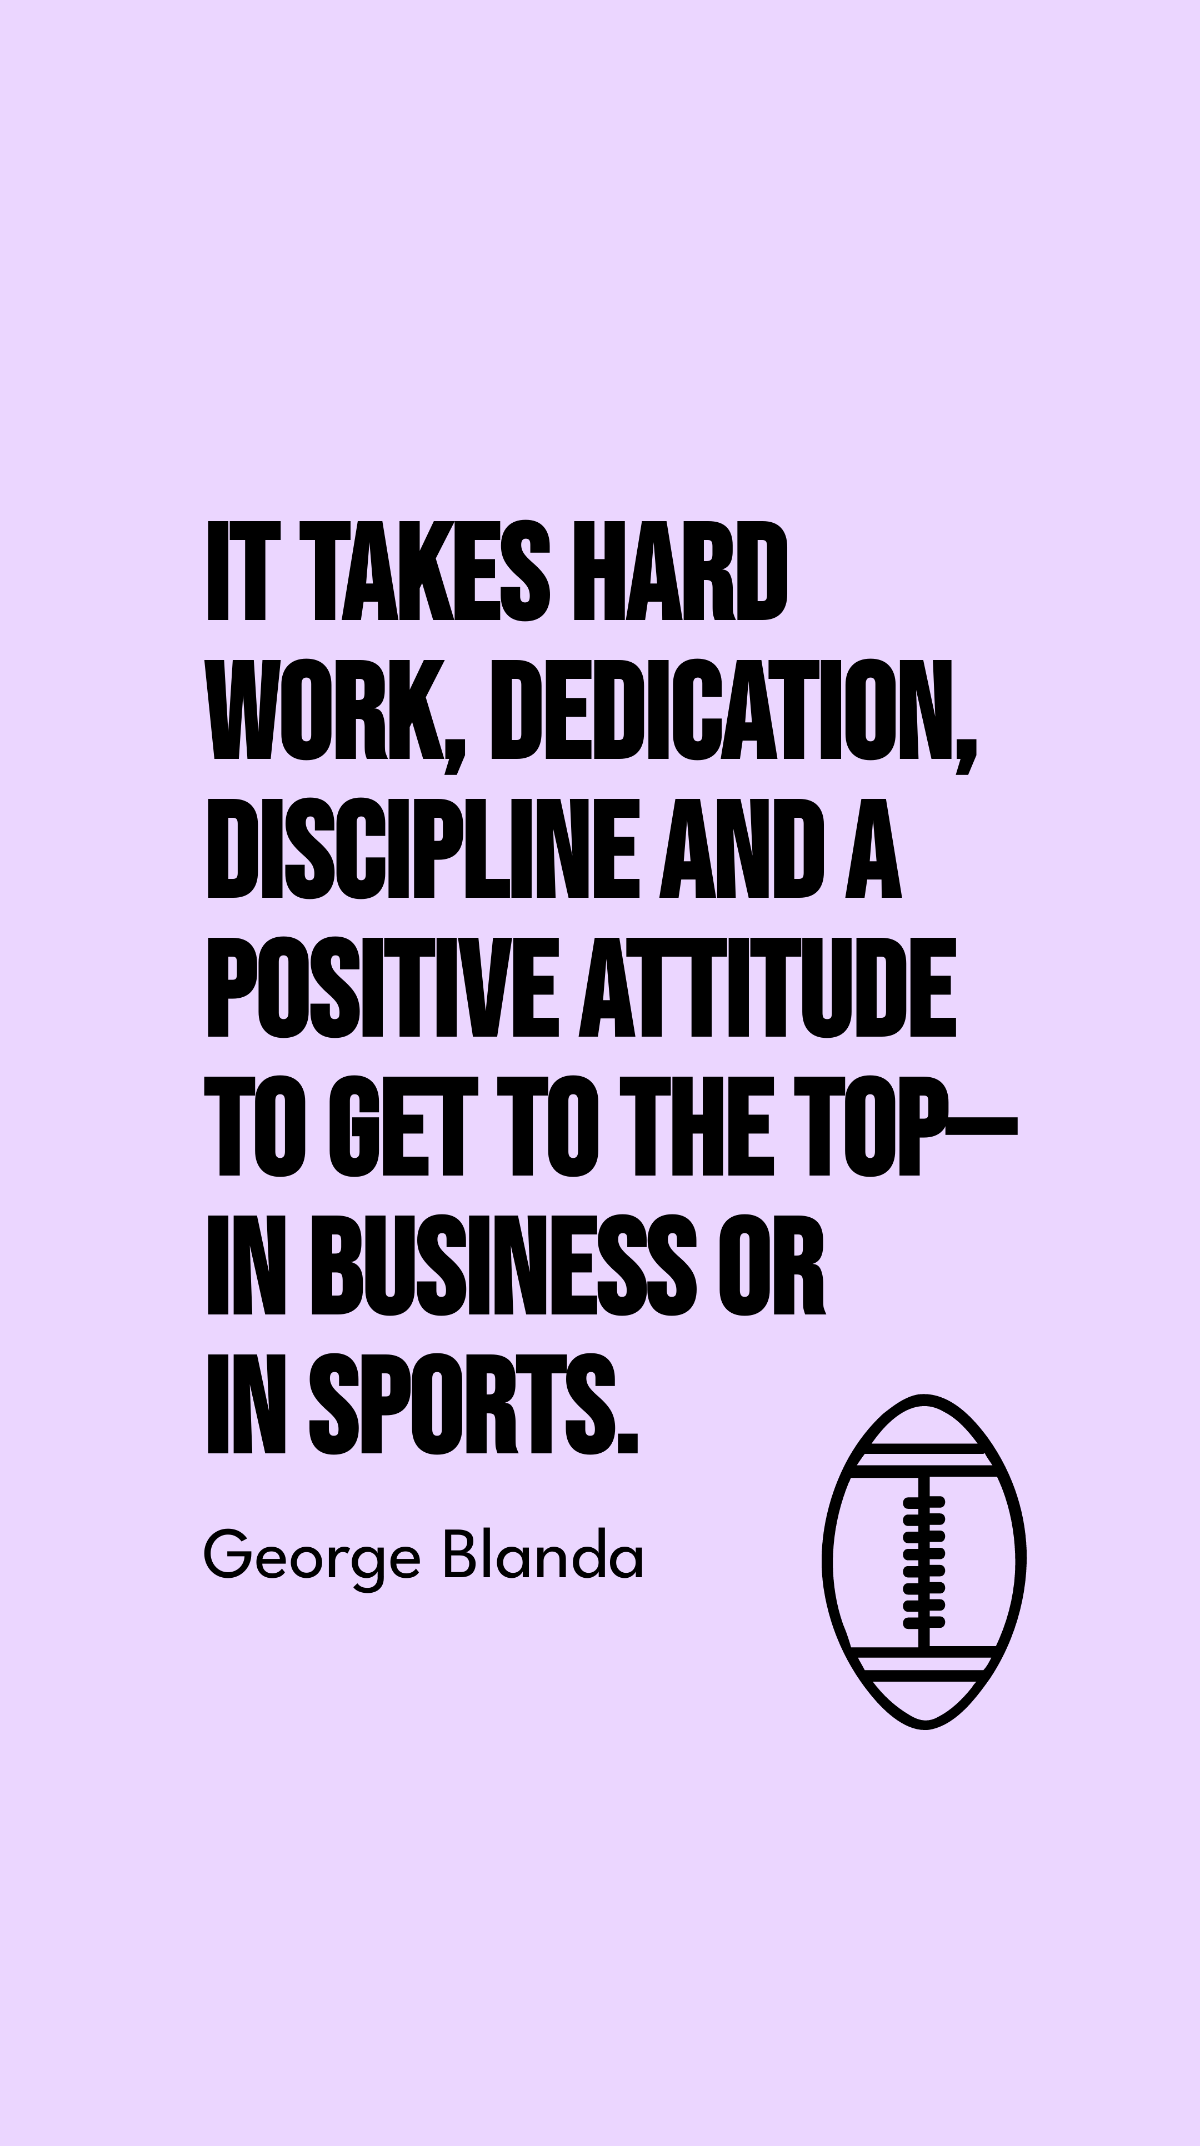 George Blanda - It takes hard work, dedication, discipline and a positive attitude to get to the top - in business or in sports.